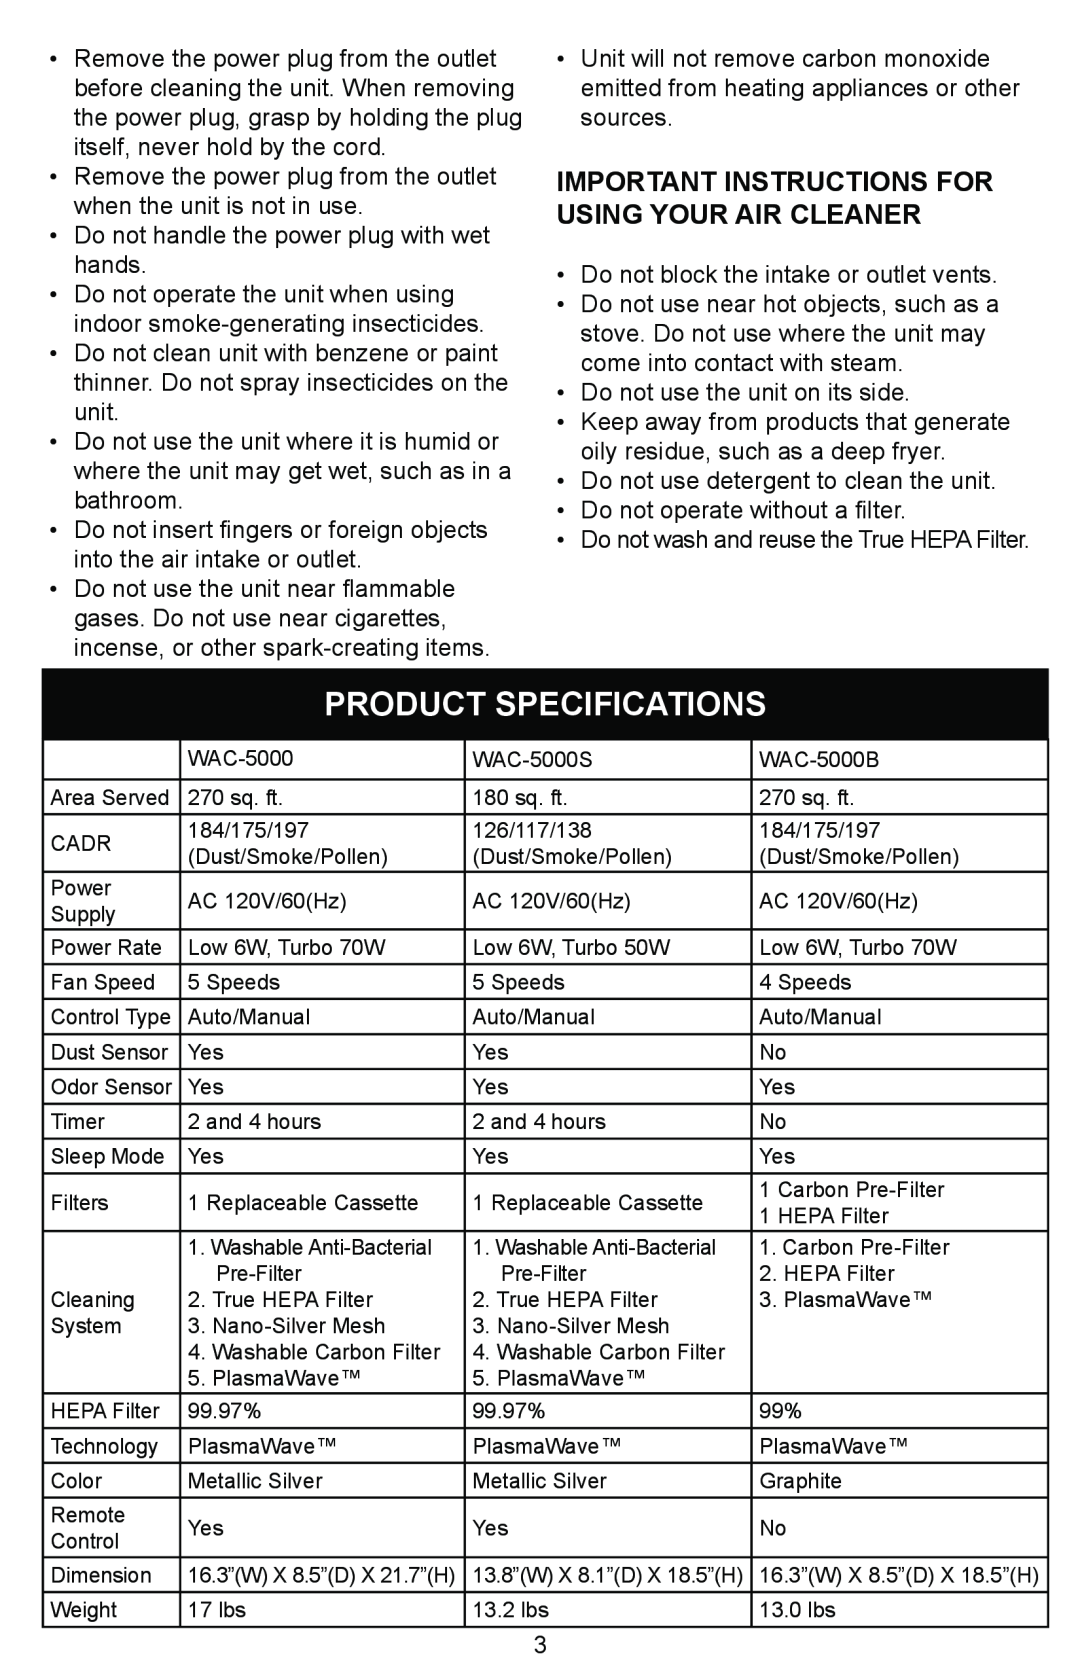 Winix manual Product Specifications, Important Instructions For Using Your Air Cleaner 